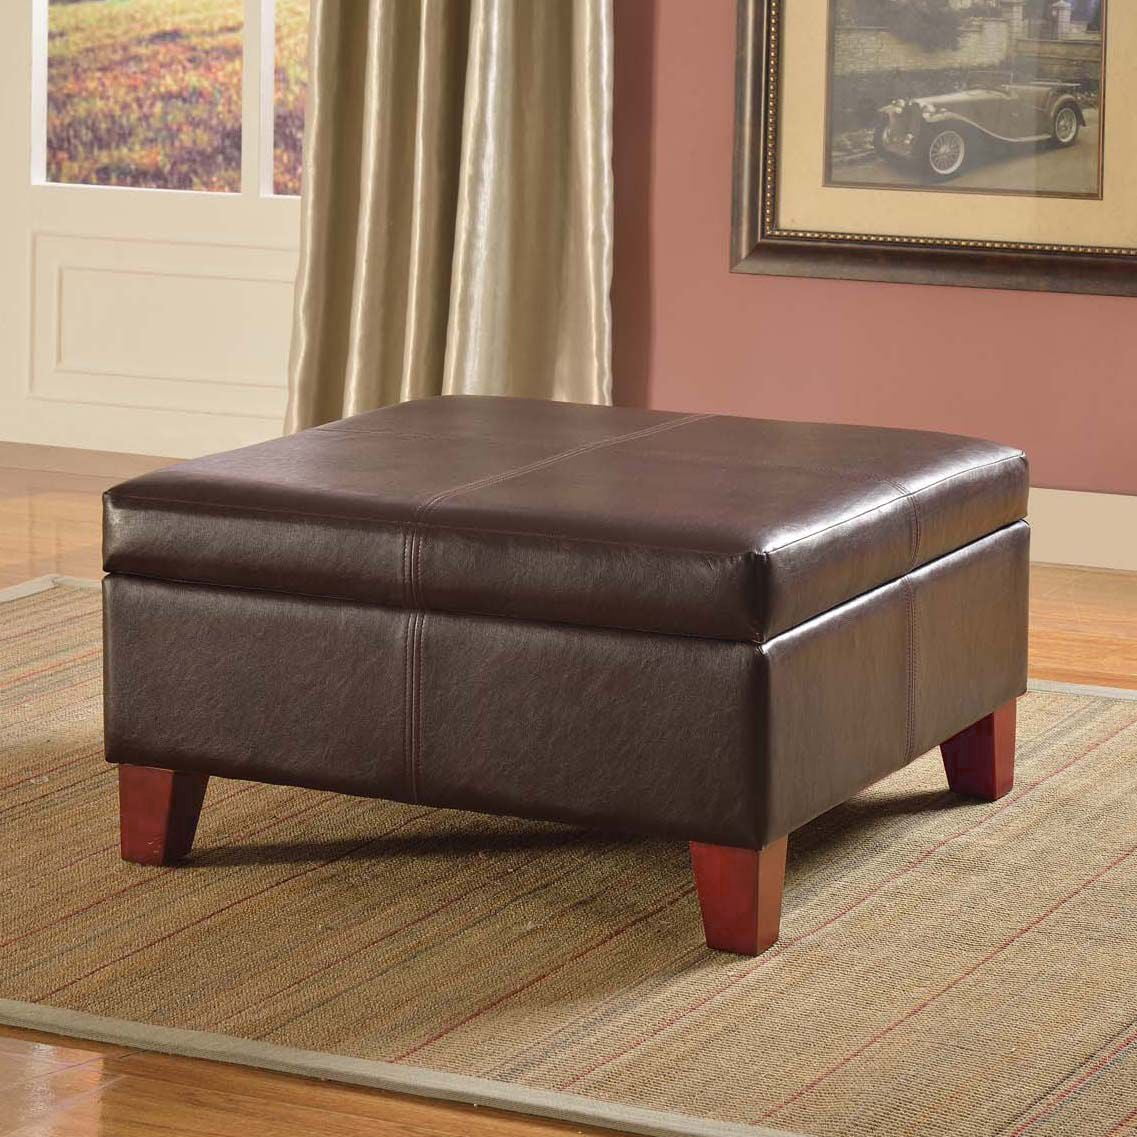 Homepop Luxury Large Faux Leather, Faux Leather Storage Bench Ottoman Brown